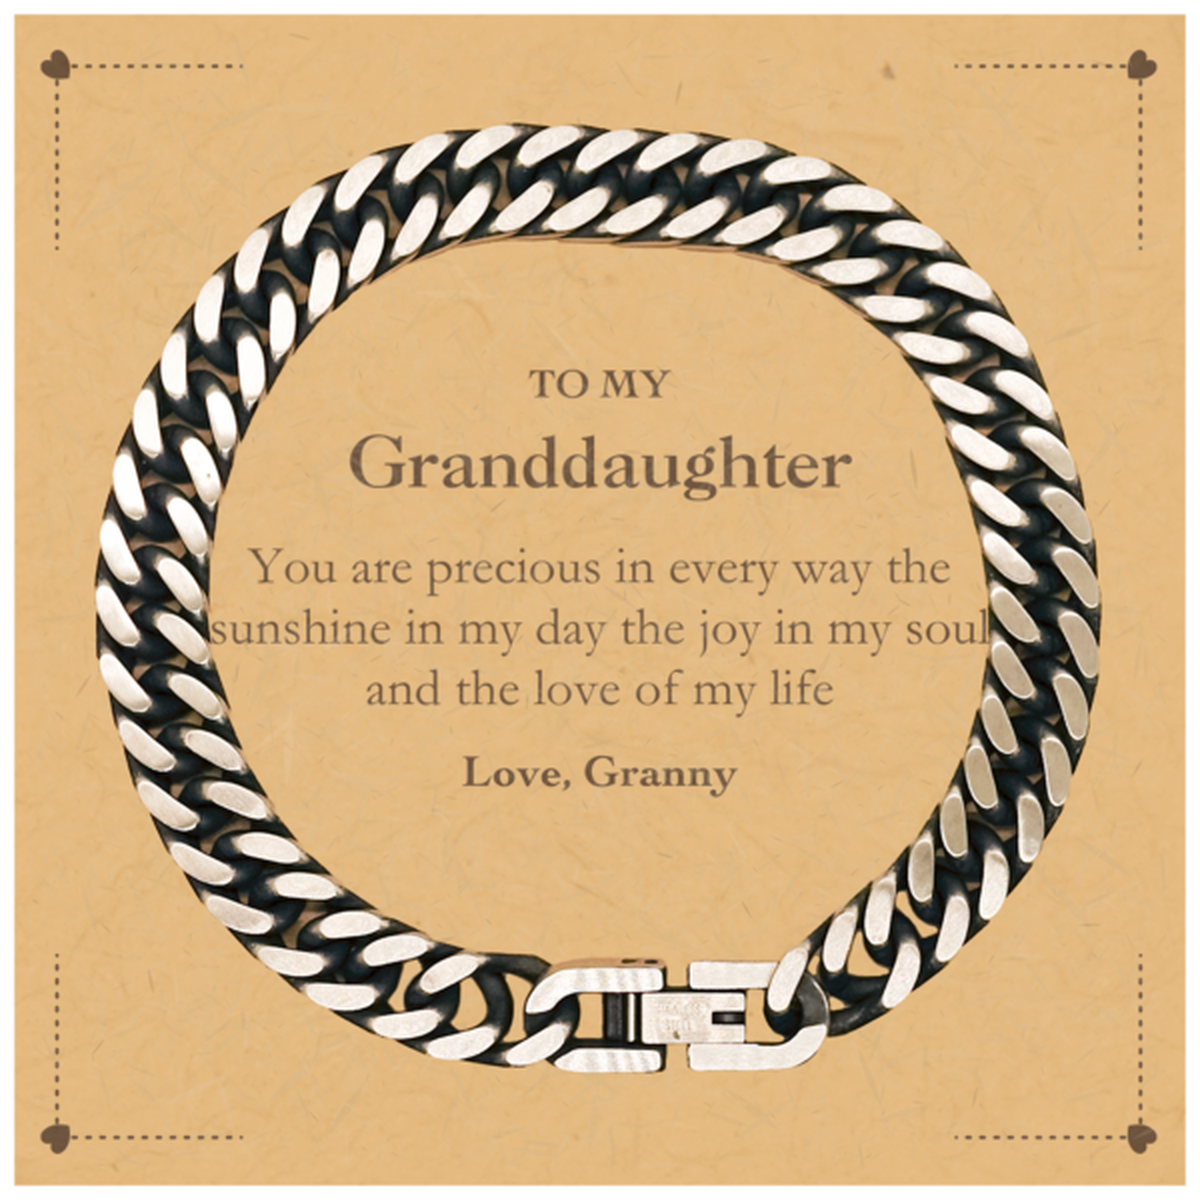 Graduation Gifts for Granddaughter Cuban Link Chain Bracelet Present from Granny, Christmas Granddaughter Birthday Gifts Granddaughter You are precious in every way the sunshine in my day. Love, Granny